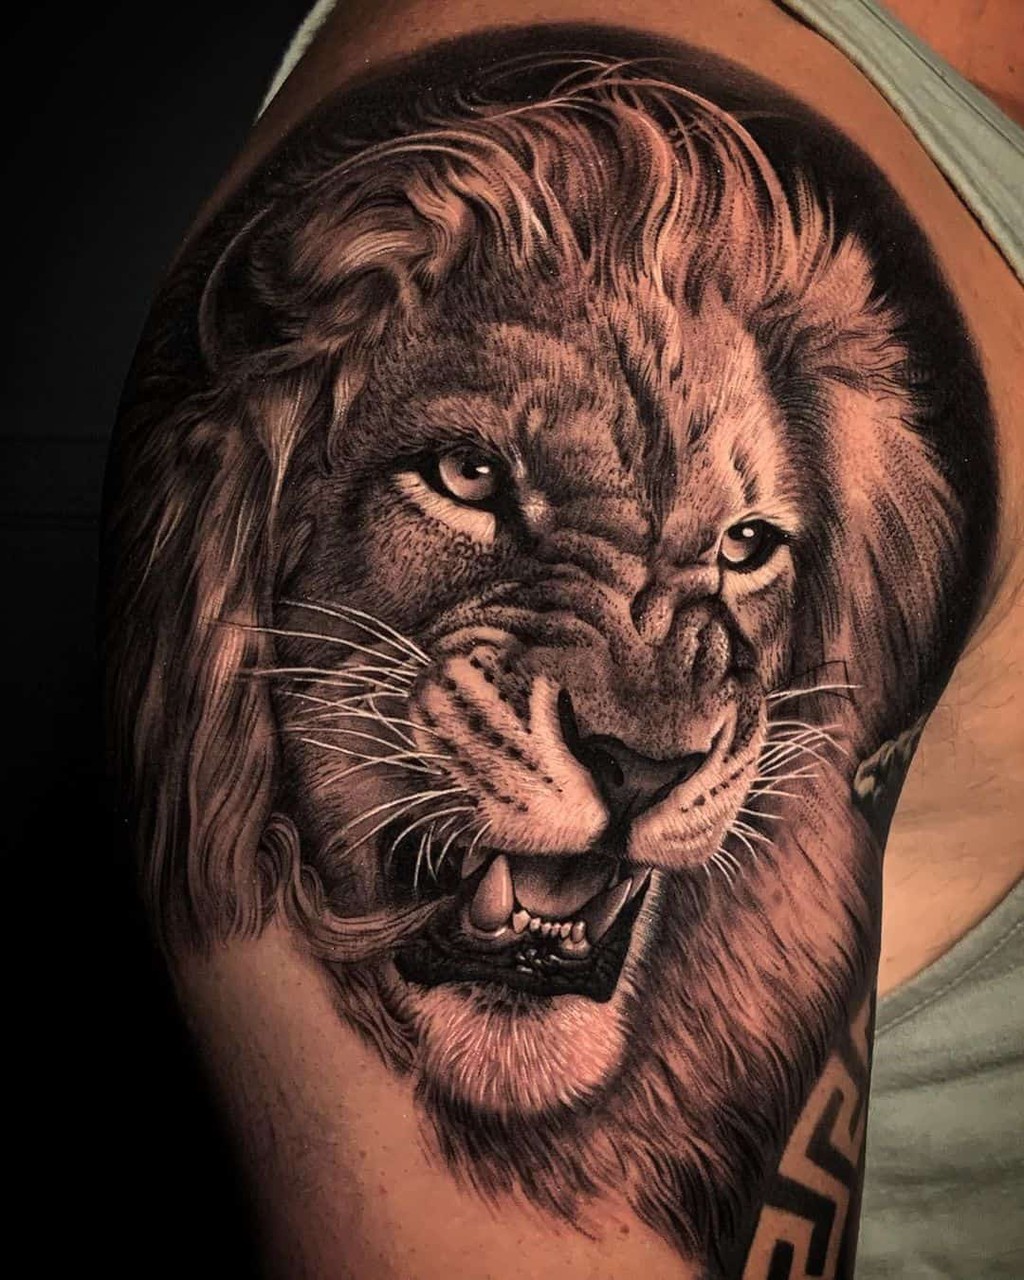 8,239 Angry Lion Tattoo Images, Stock Photos & Vectors | Shutterstock